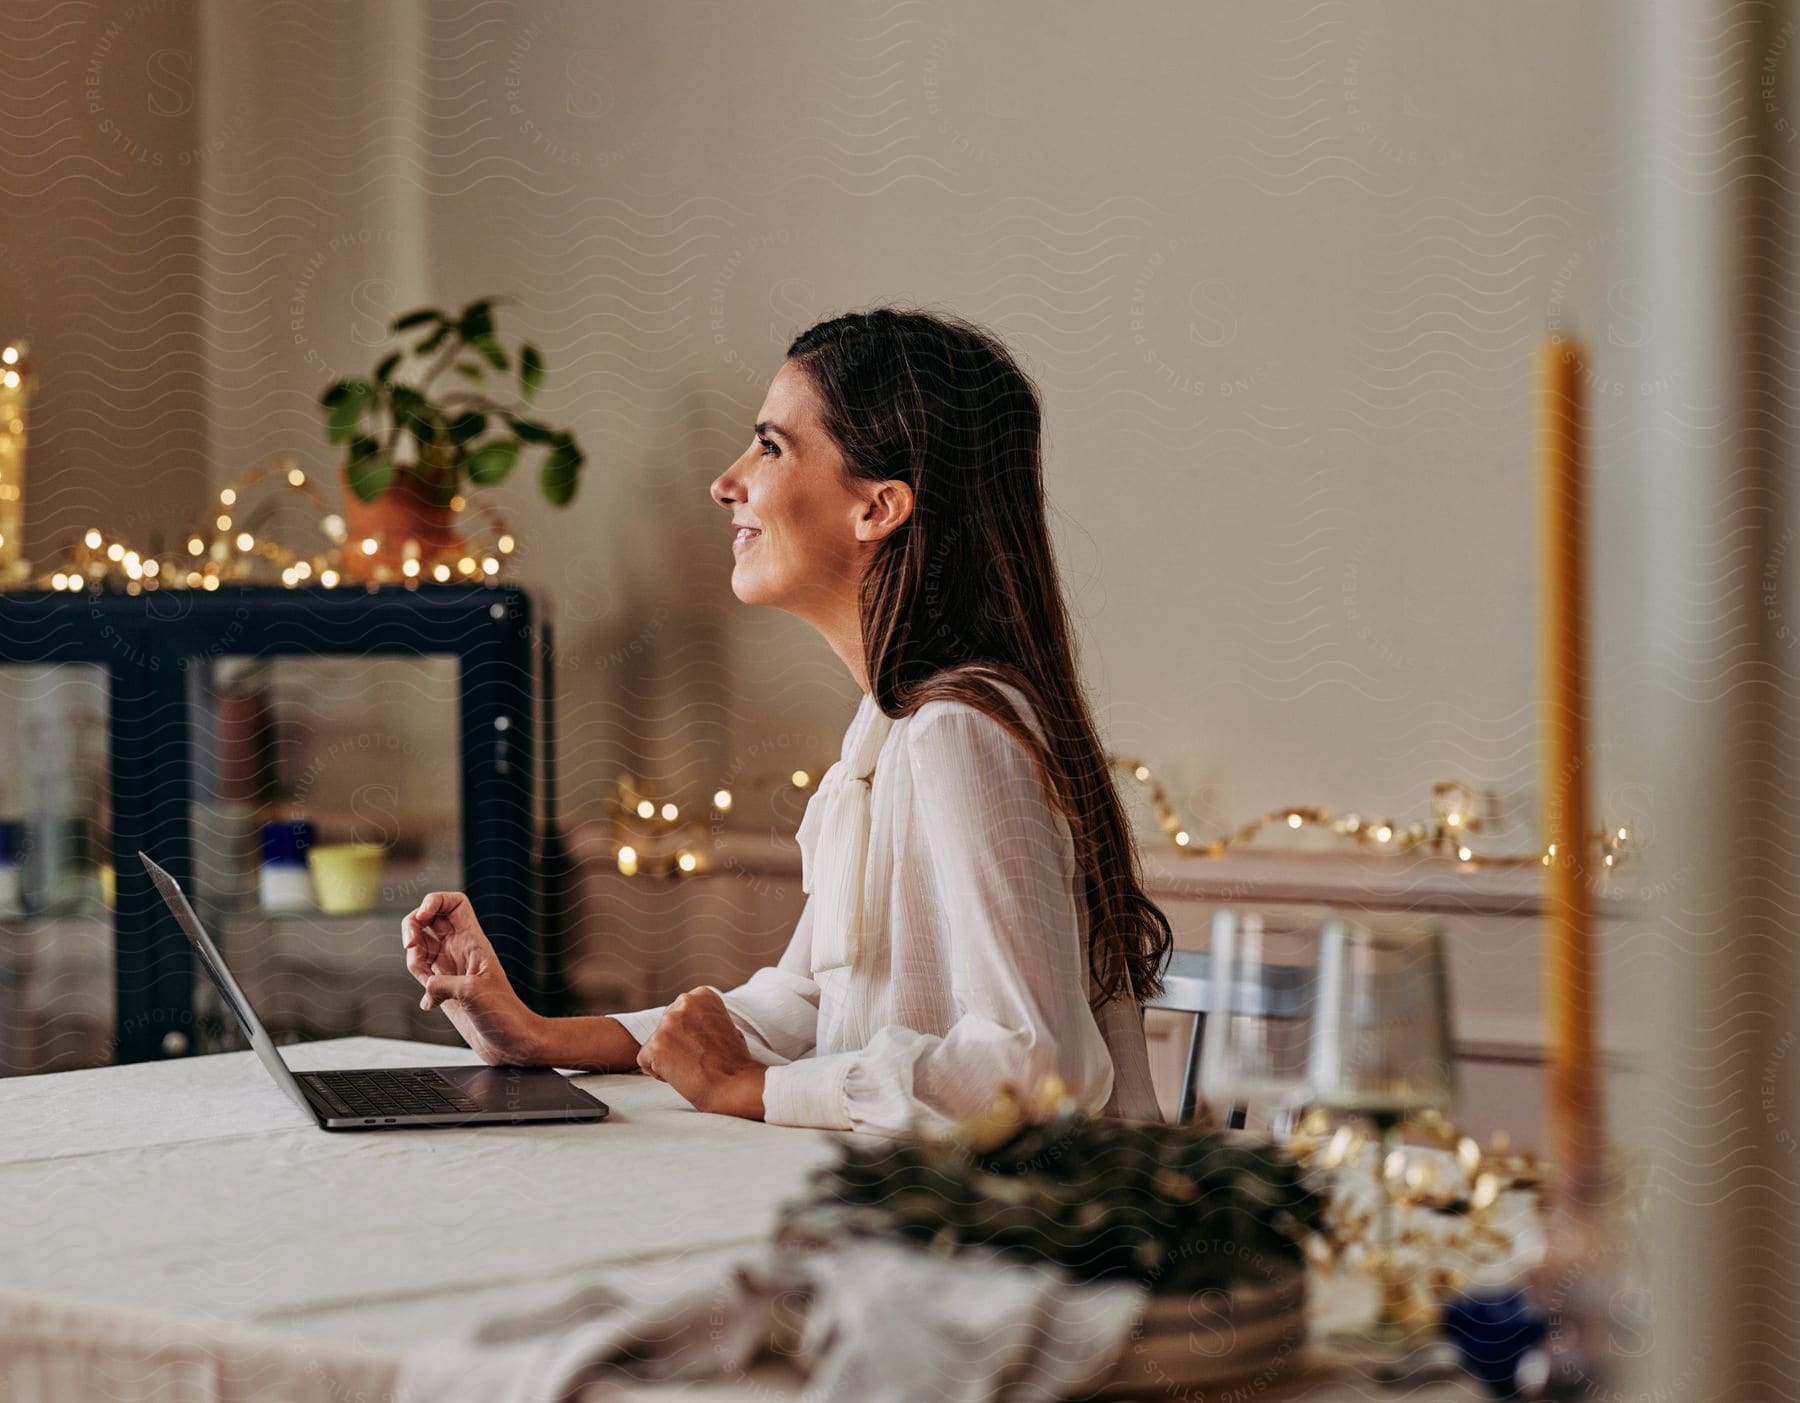 Woman using laptop at table in brightly decorated room looks up with a smile.